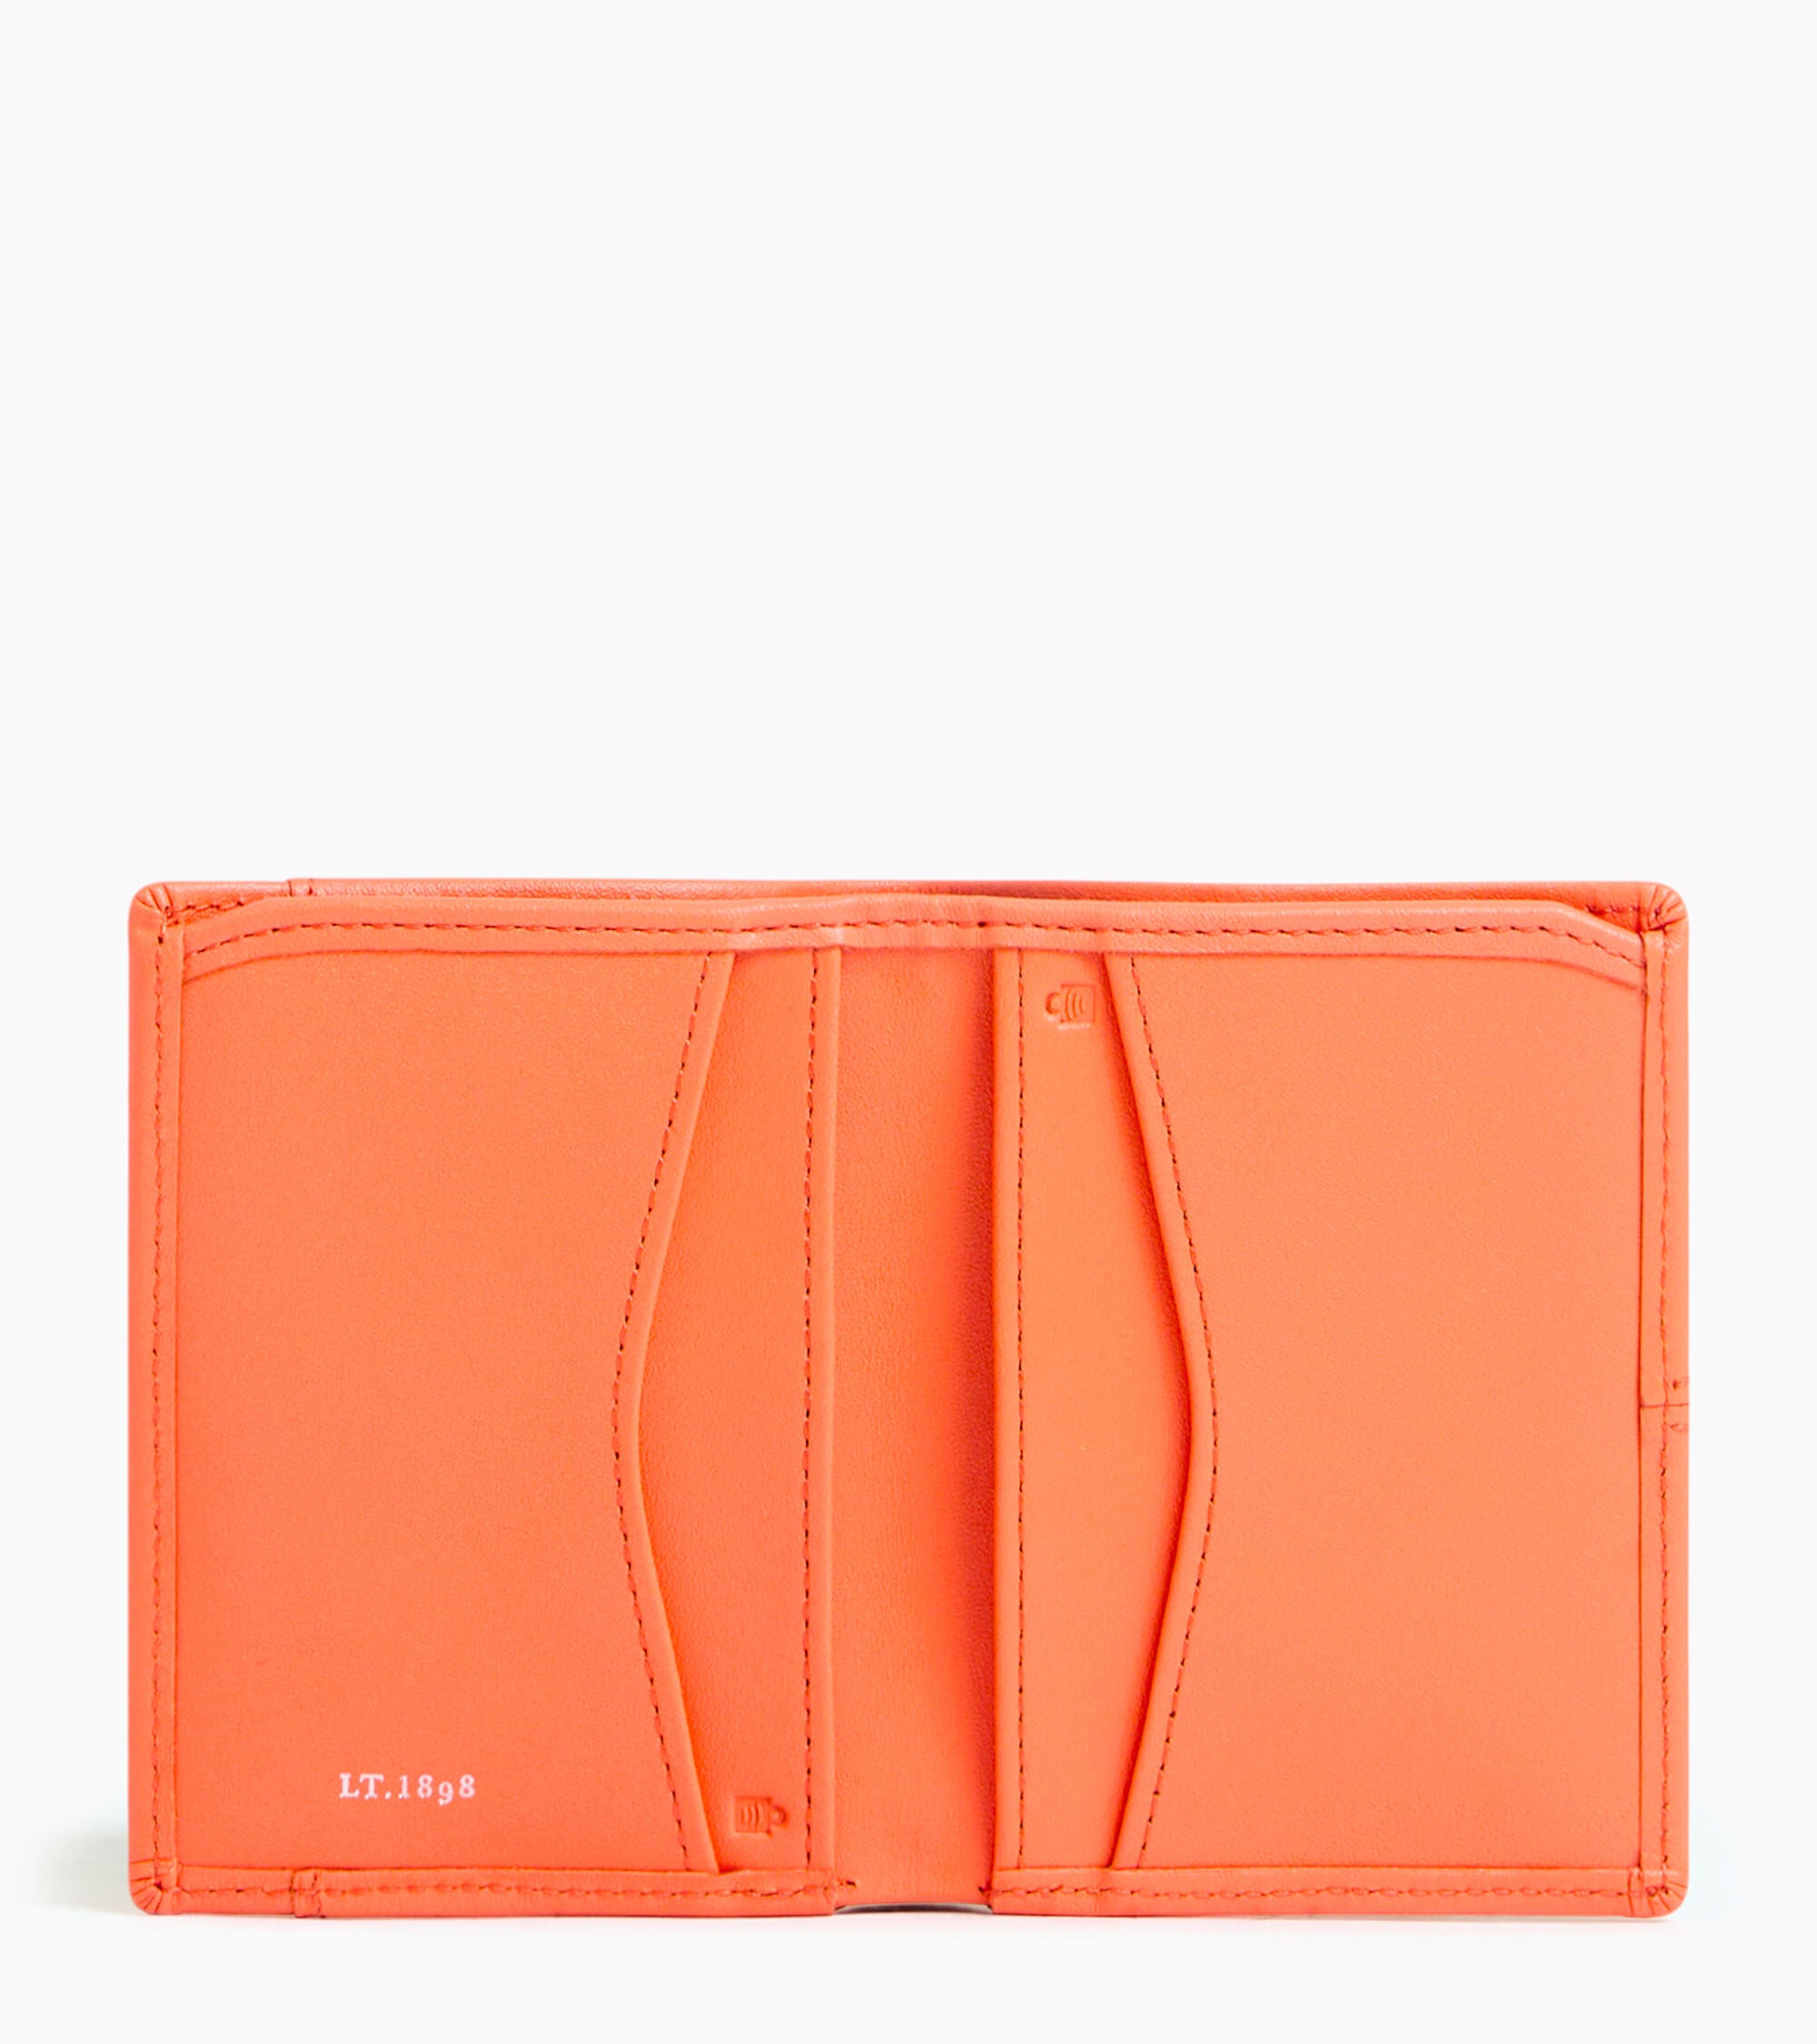 Charlotte smooth leather card holder